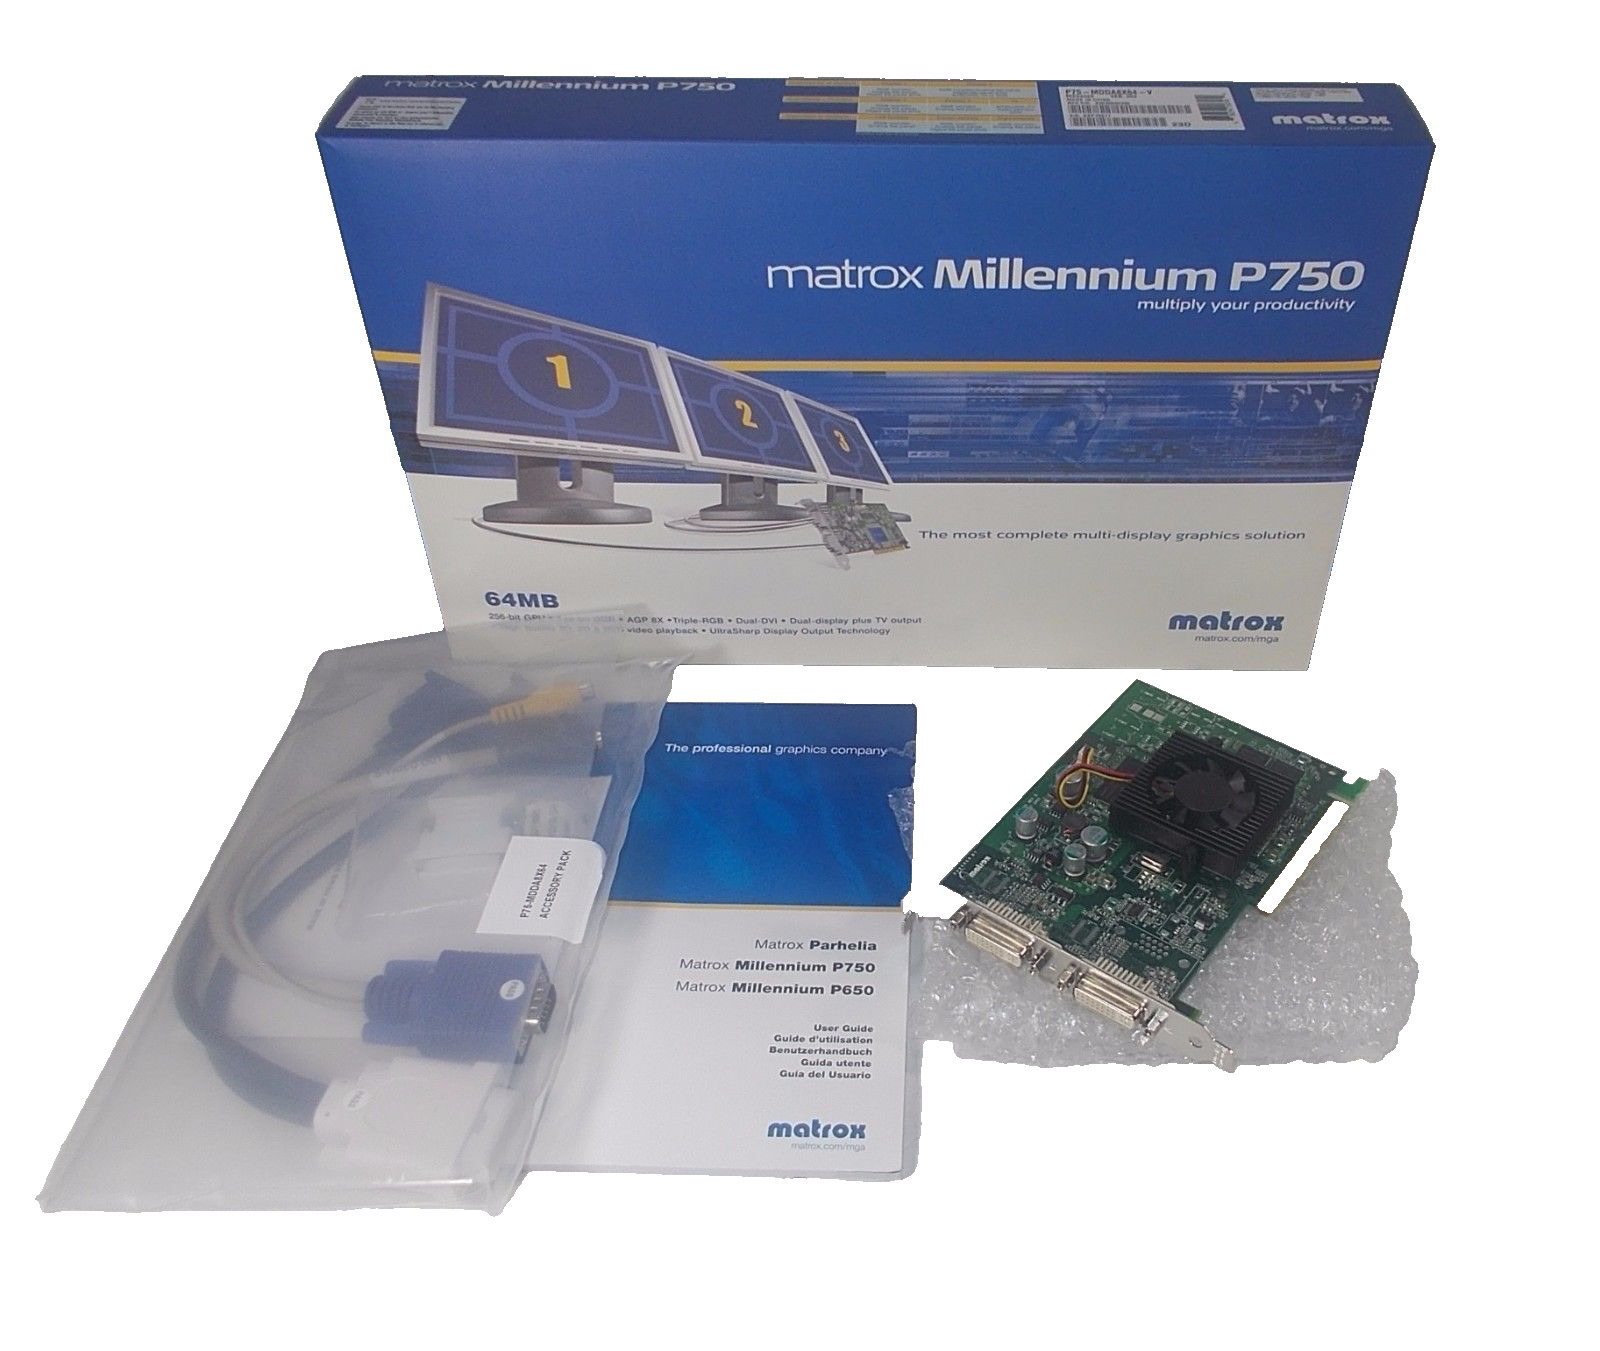 New Matrox Millennium P750 64MB AGP Video Card w/ Cables and Drivers